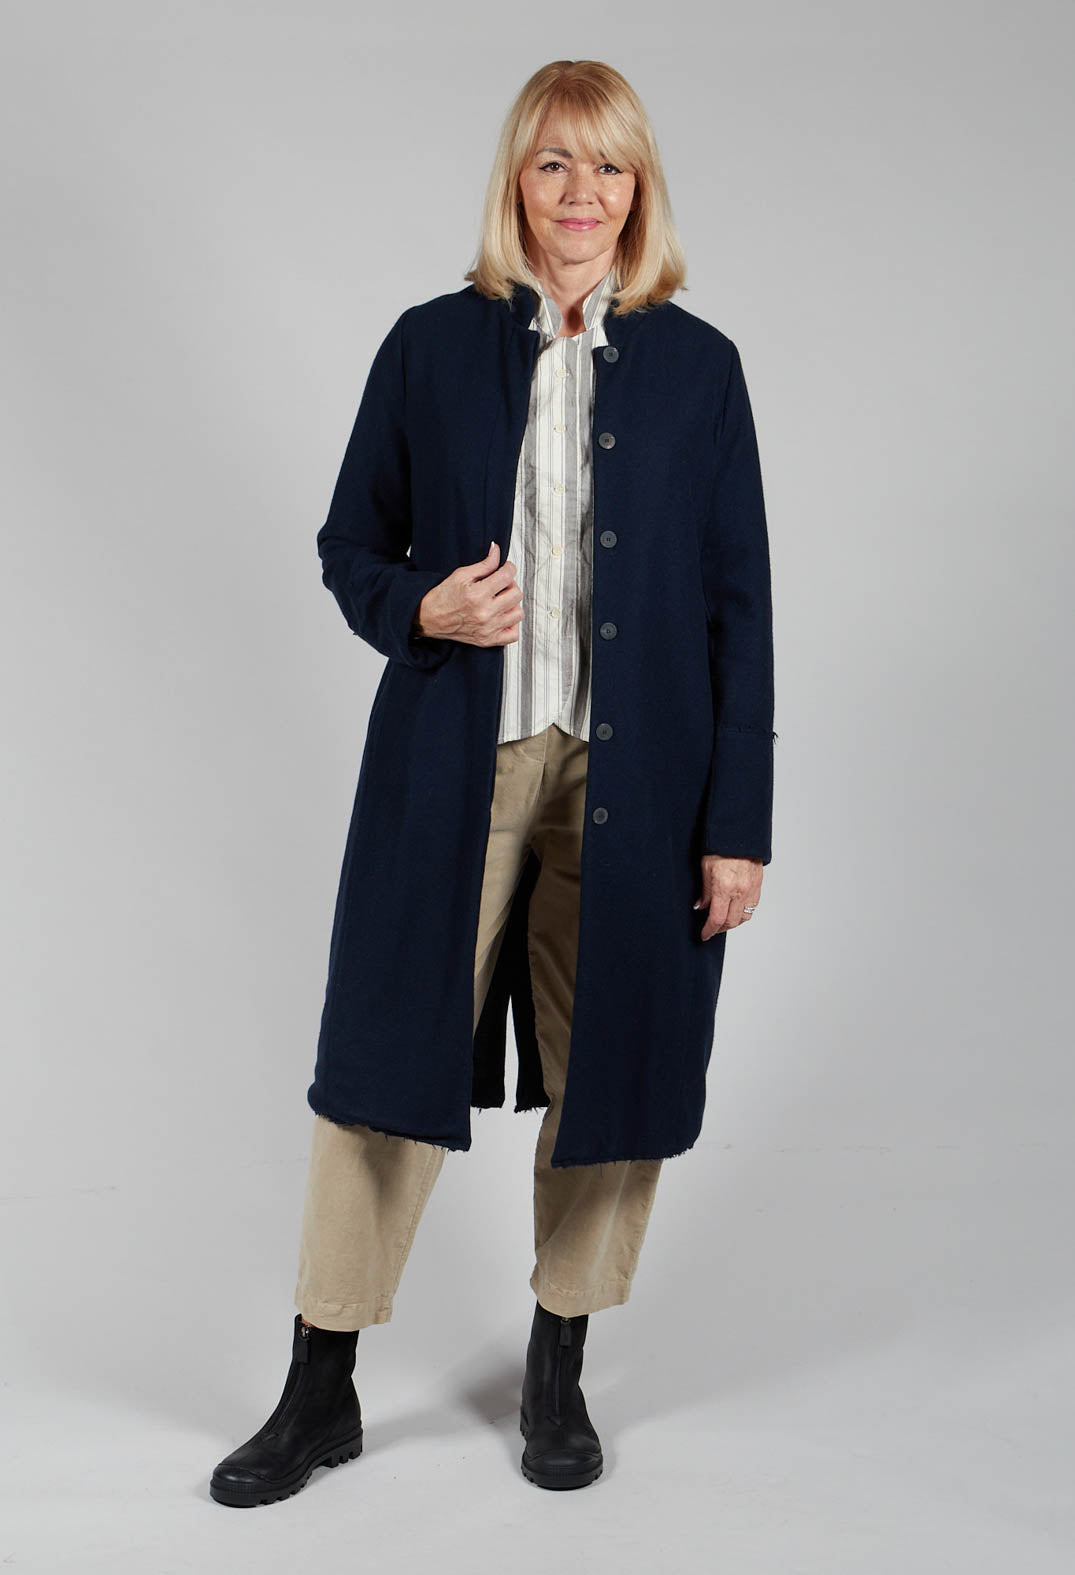 Cashmere Duster Coat in Abiss